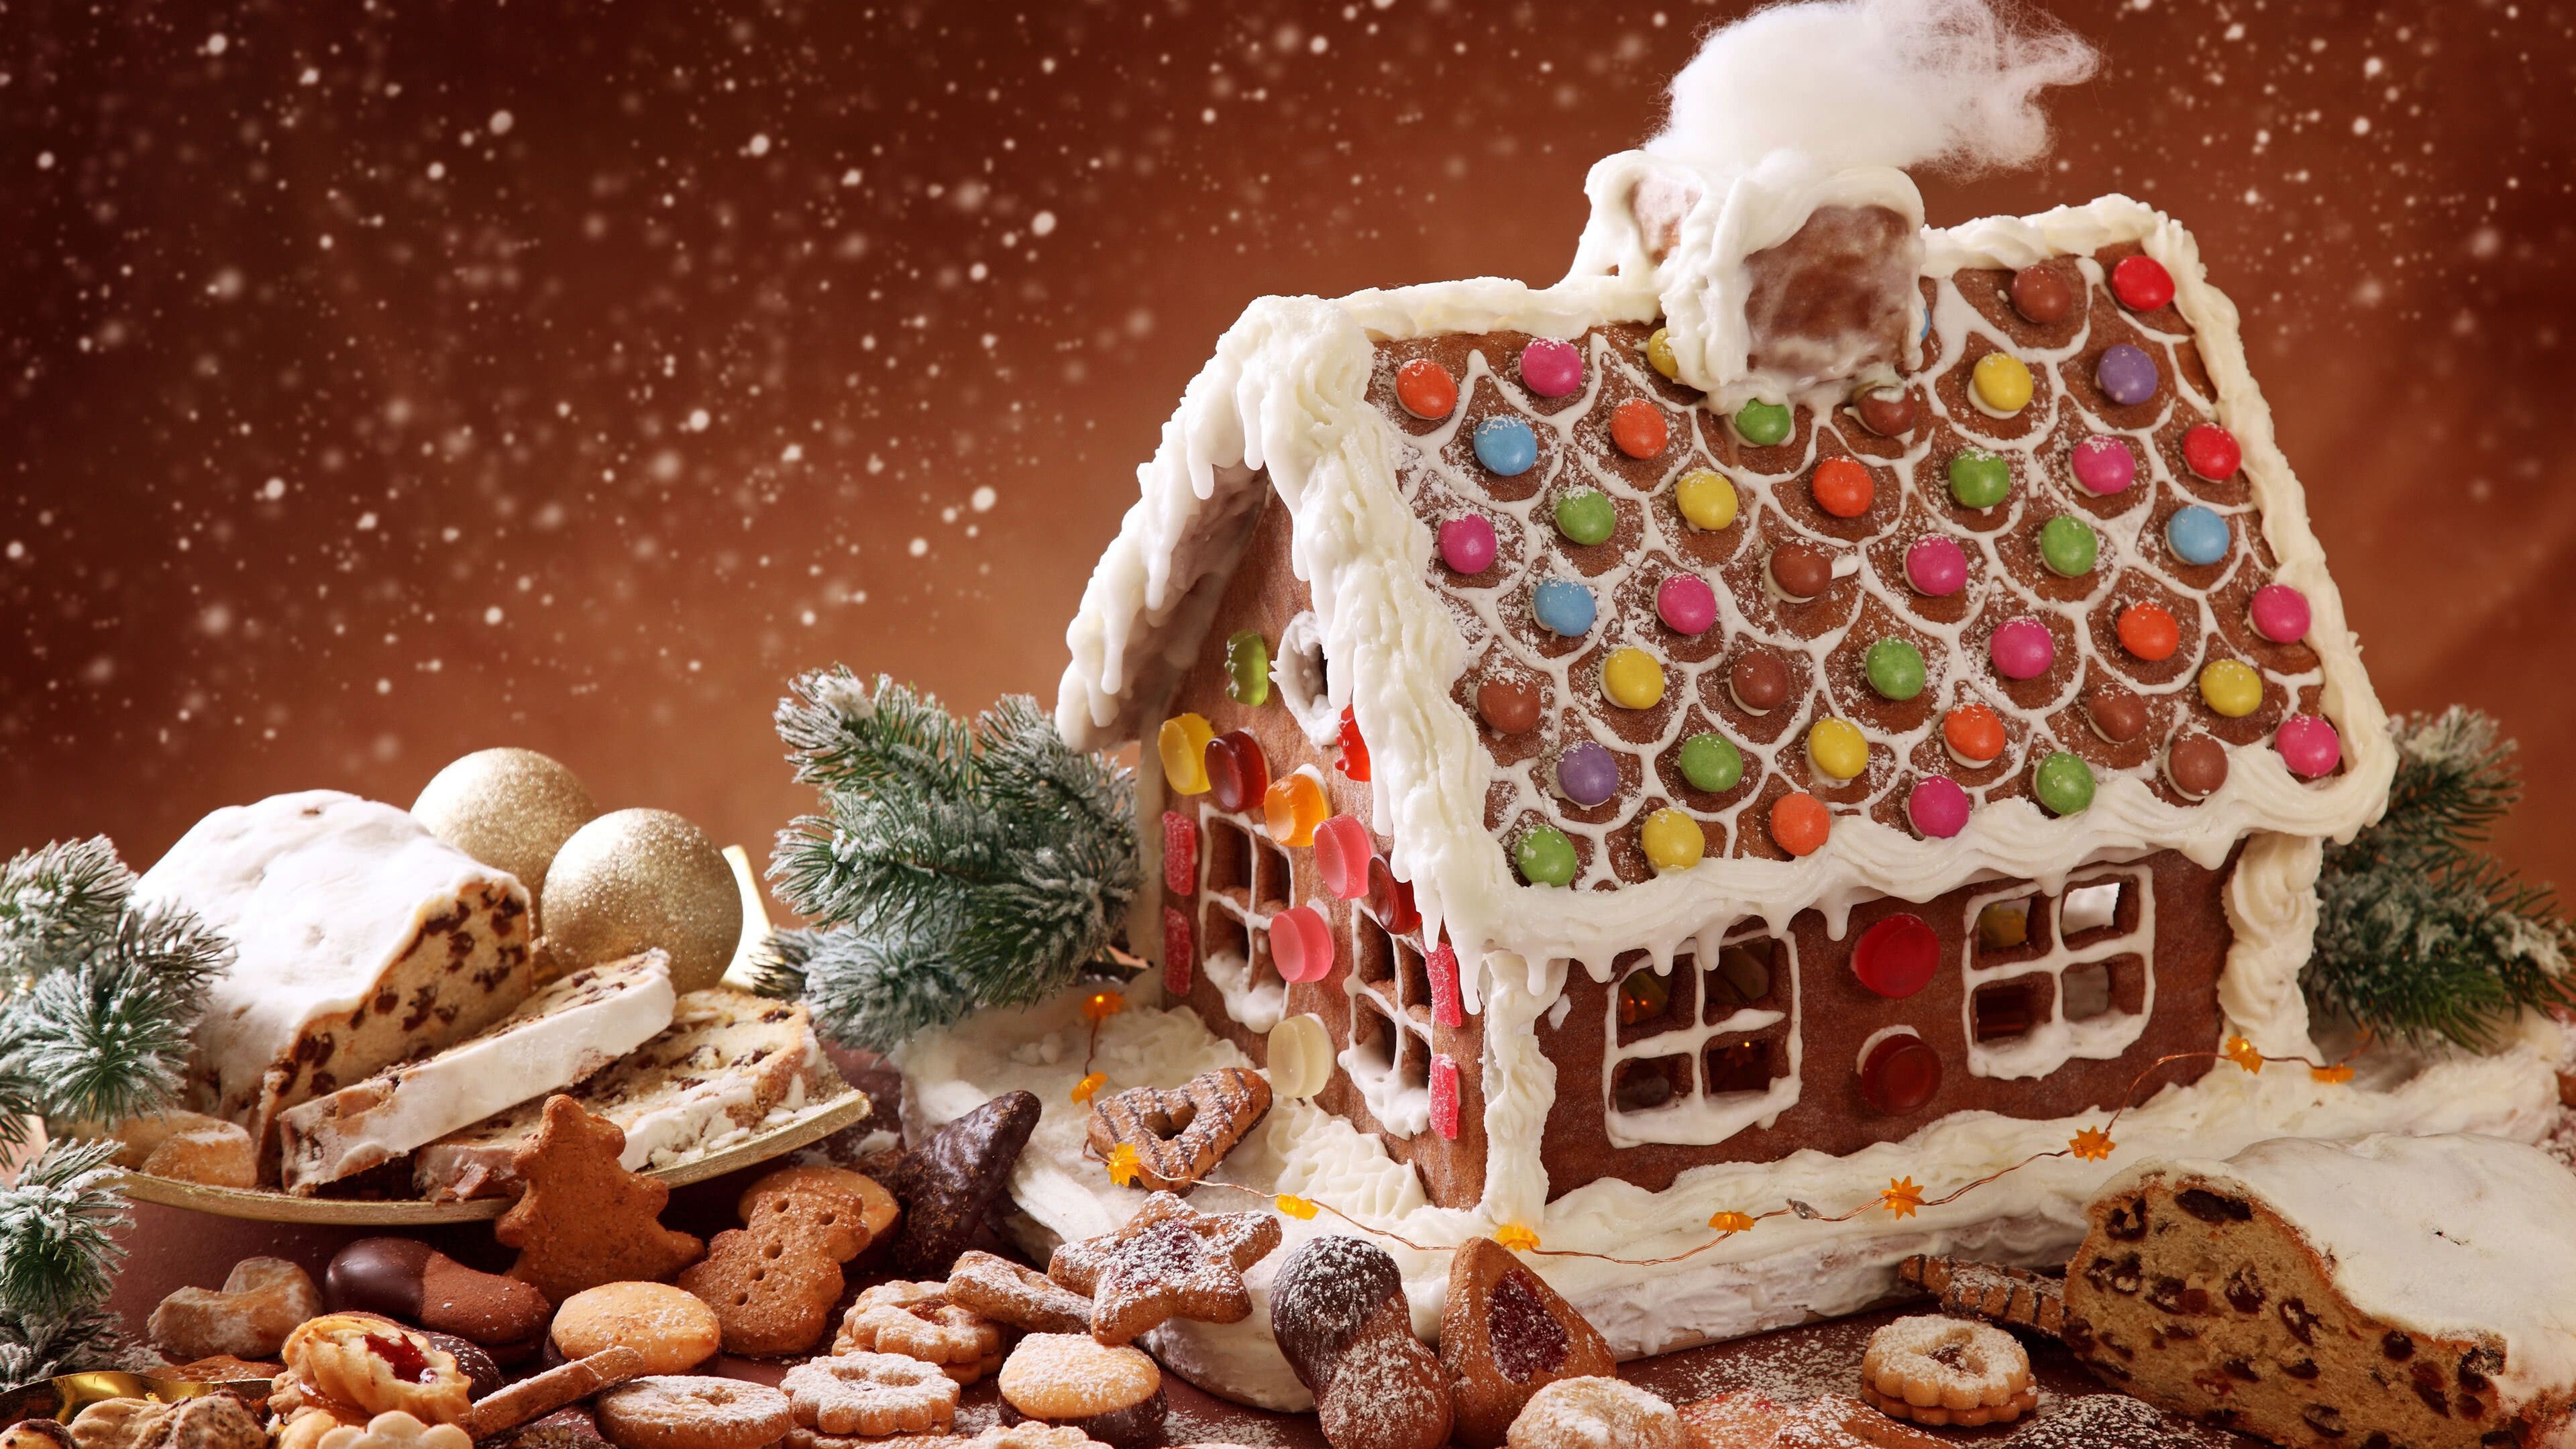 Gingerbread House: Confectionery shaped like a building, A house made of cookie dough, Crisp ginger biscuit. 3840x2160 4K Wallpaper.